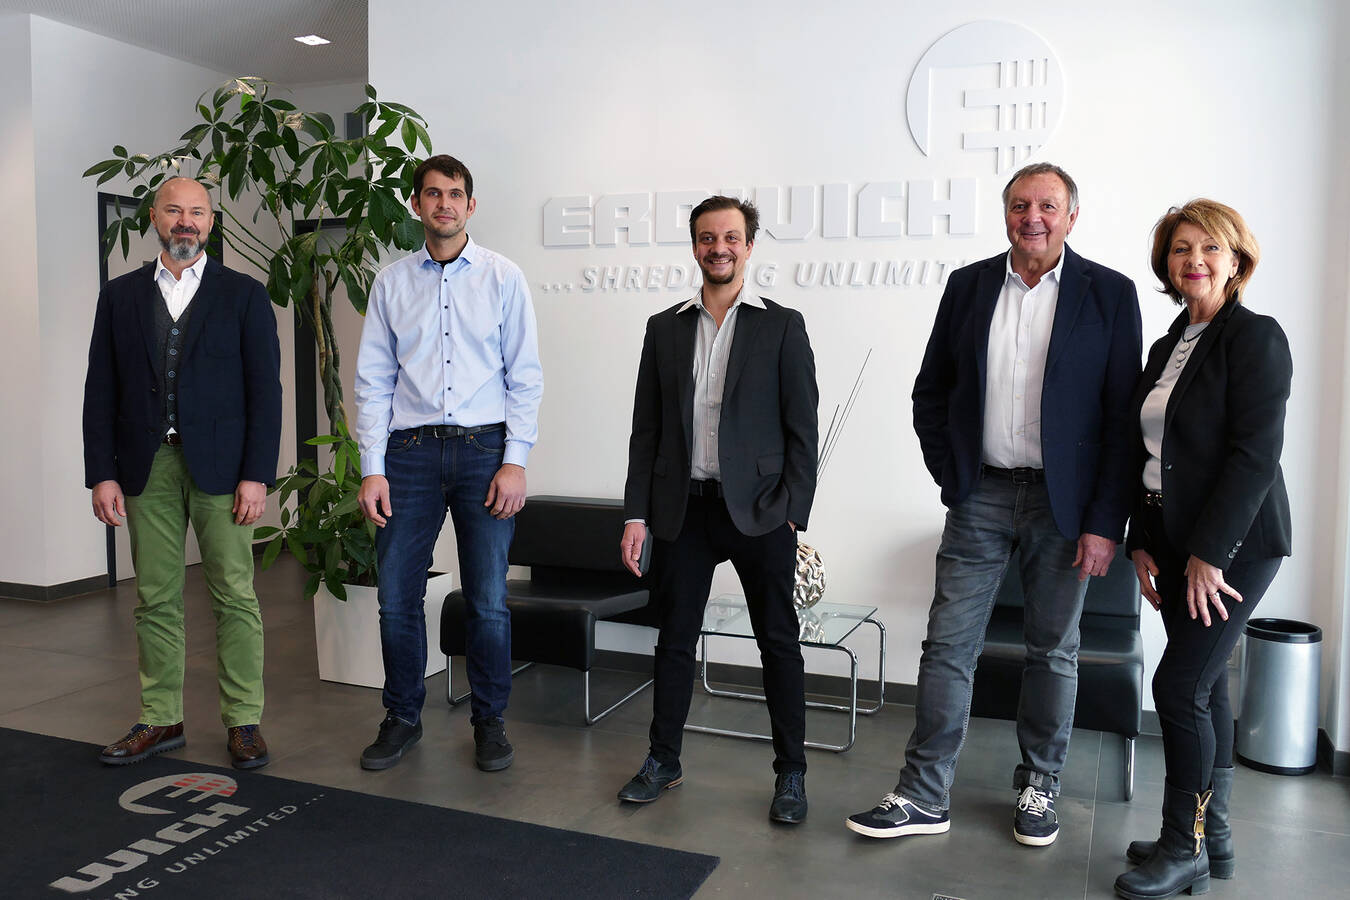 Technical Manager Florian Böhm-Feigl has been Managing Director of Erdwich Zerkleinerungs-Systeme GmbH since 01.02.2021. Together with Harald Erdwich and Reinhard Hirschmiller, he forms the new company management.